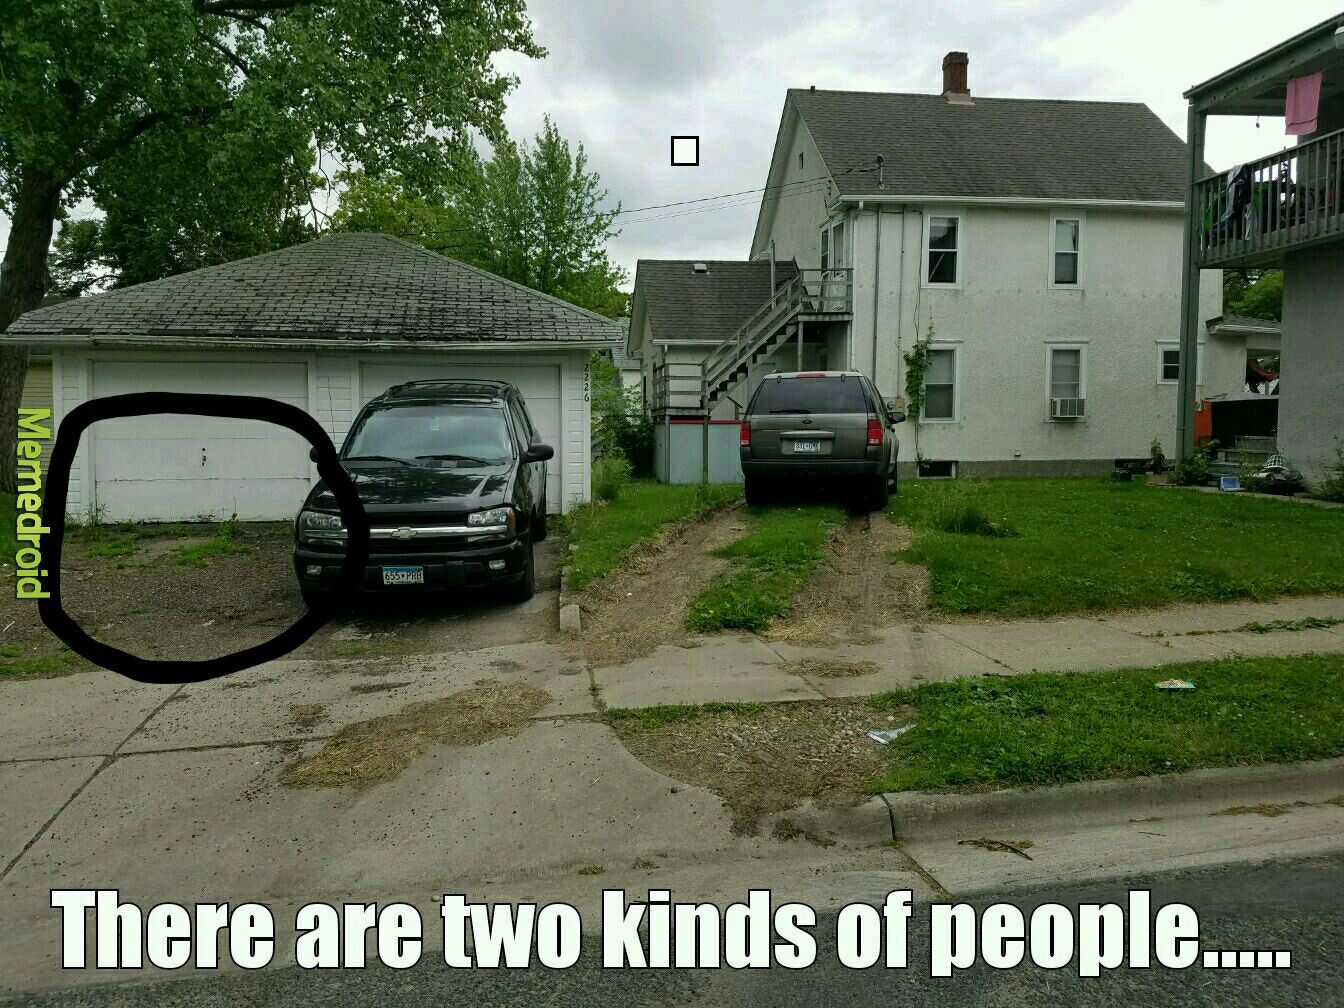 This is my house and my neighbor parks on my back lawn